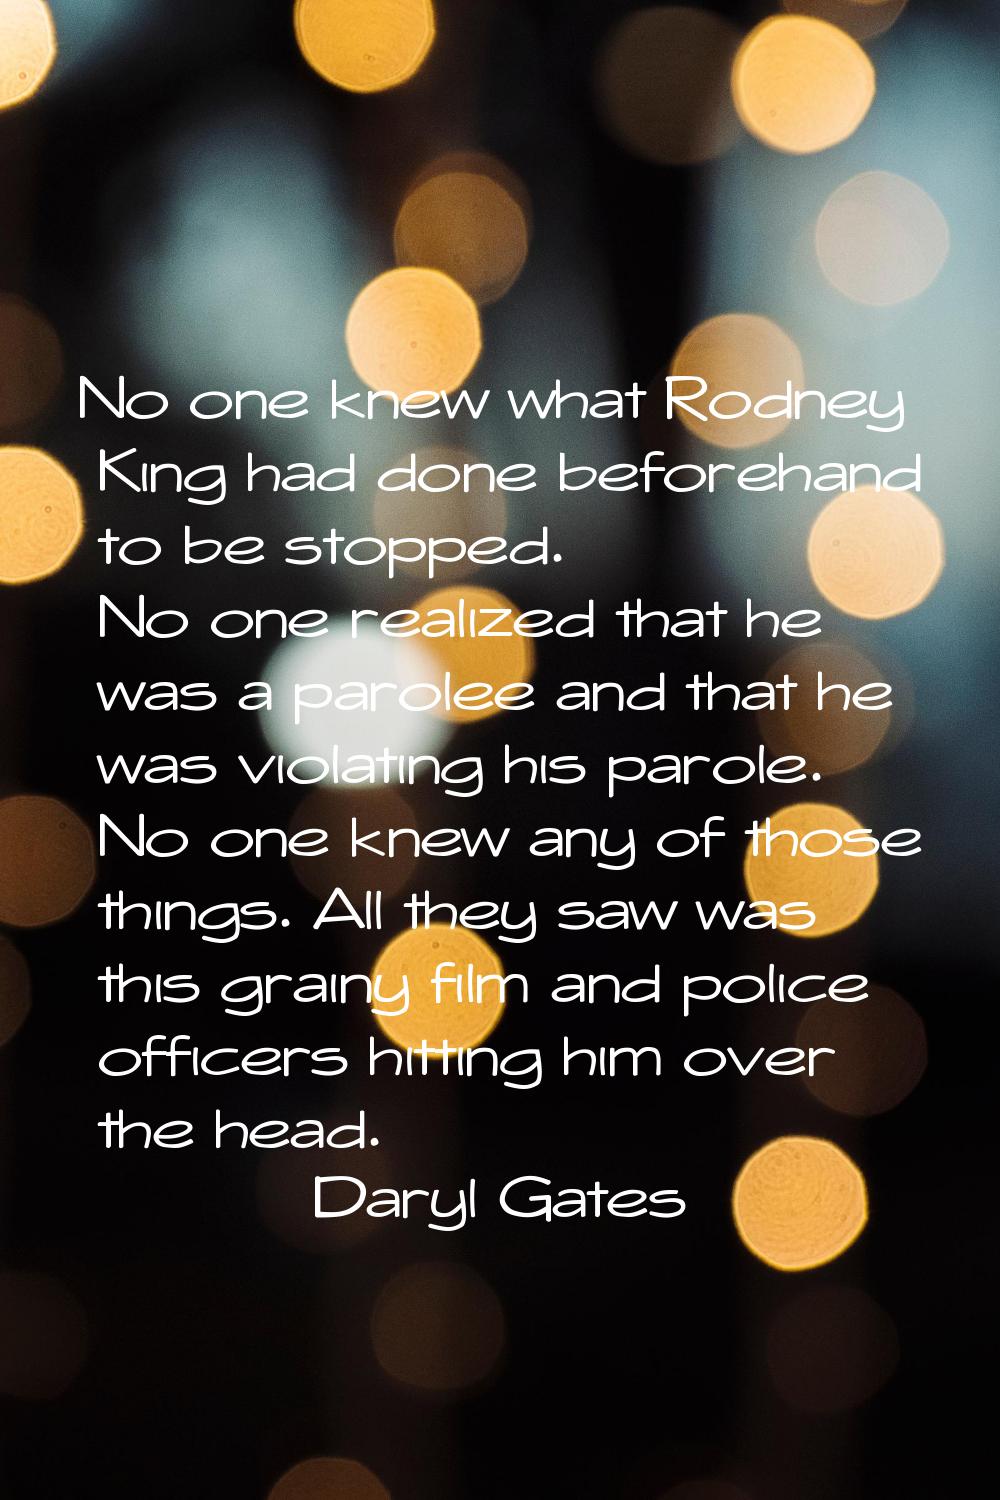 No one knew what Rodney King had done beforehand to be stopped. No one realized that he was a parol